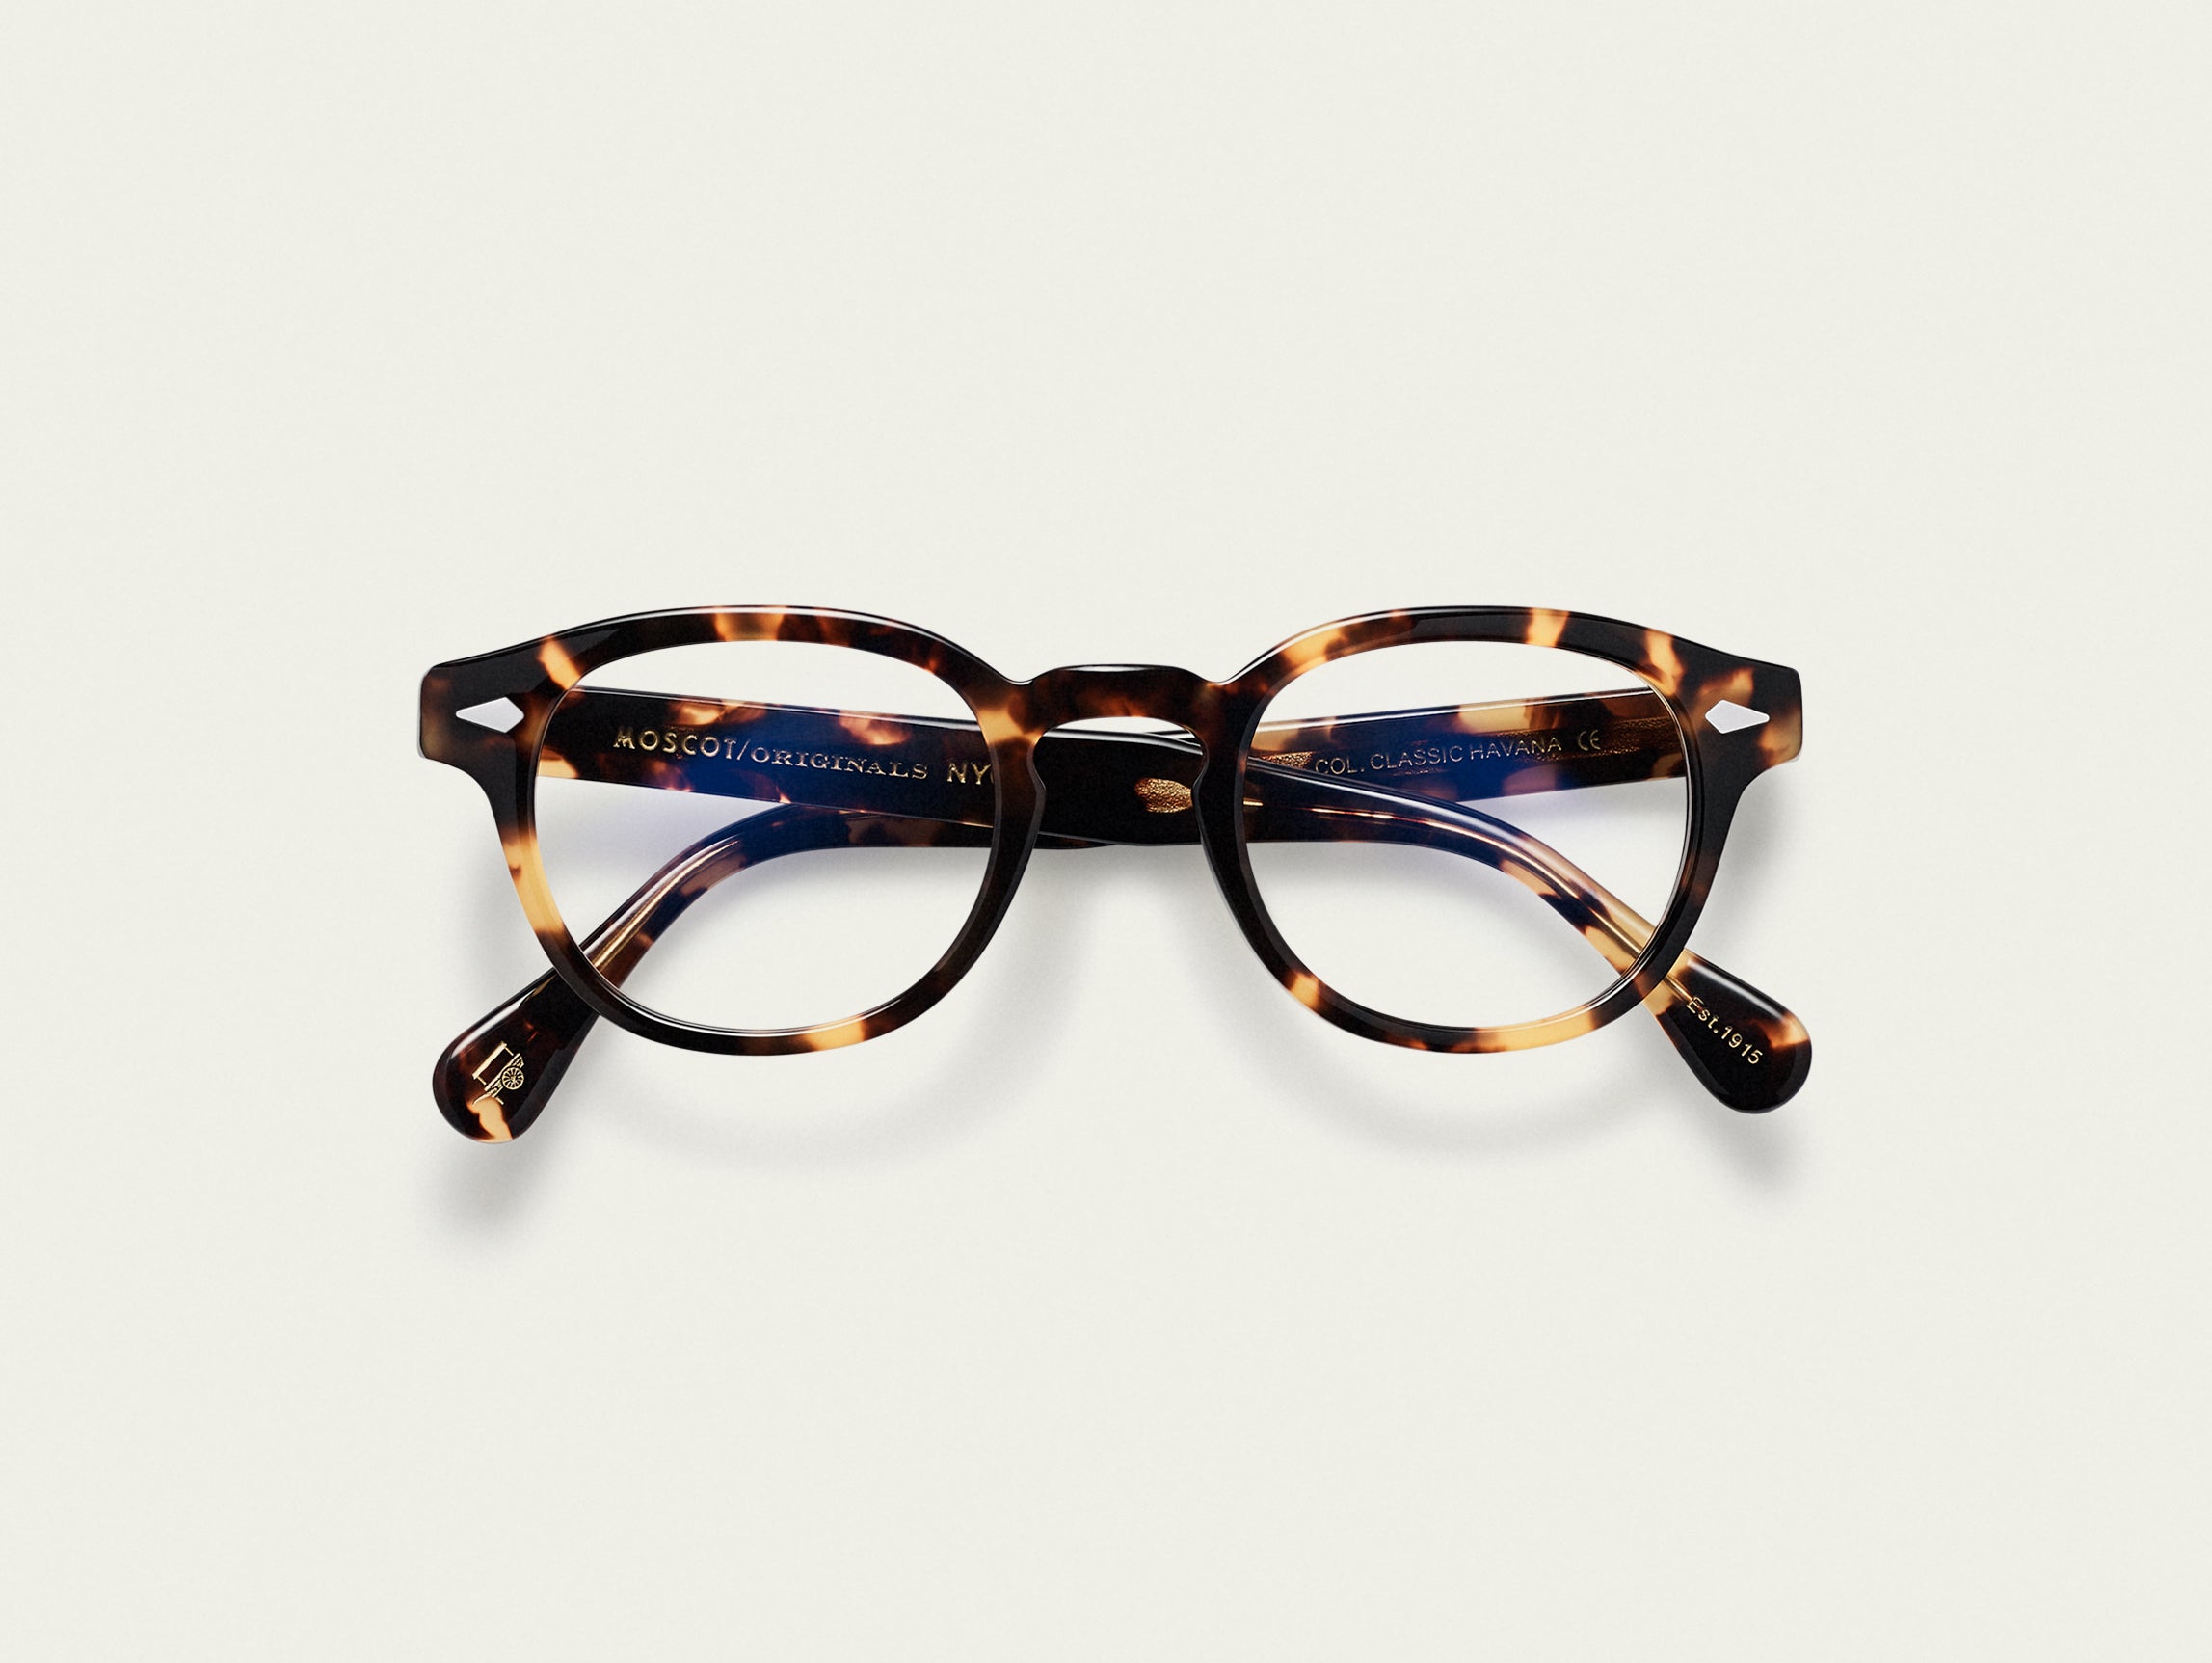 #color_classic havana | The LEMTOSH with Blue Light Filter in Classic Havana